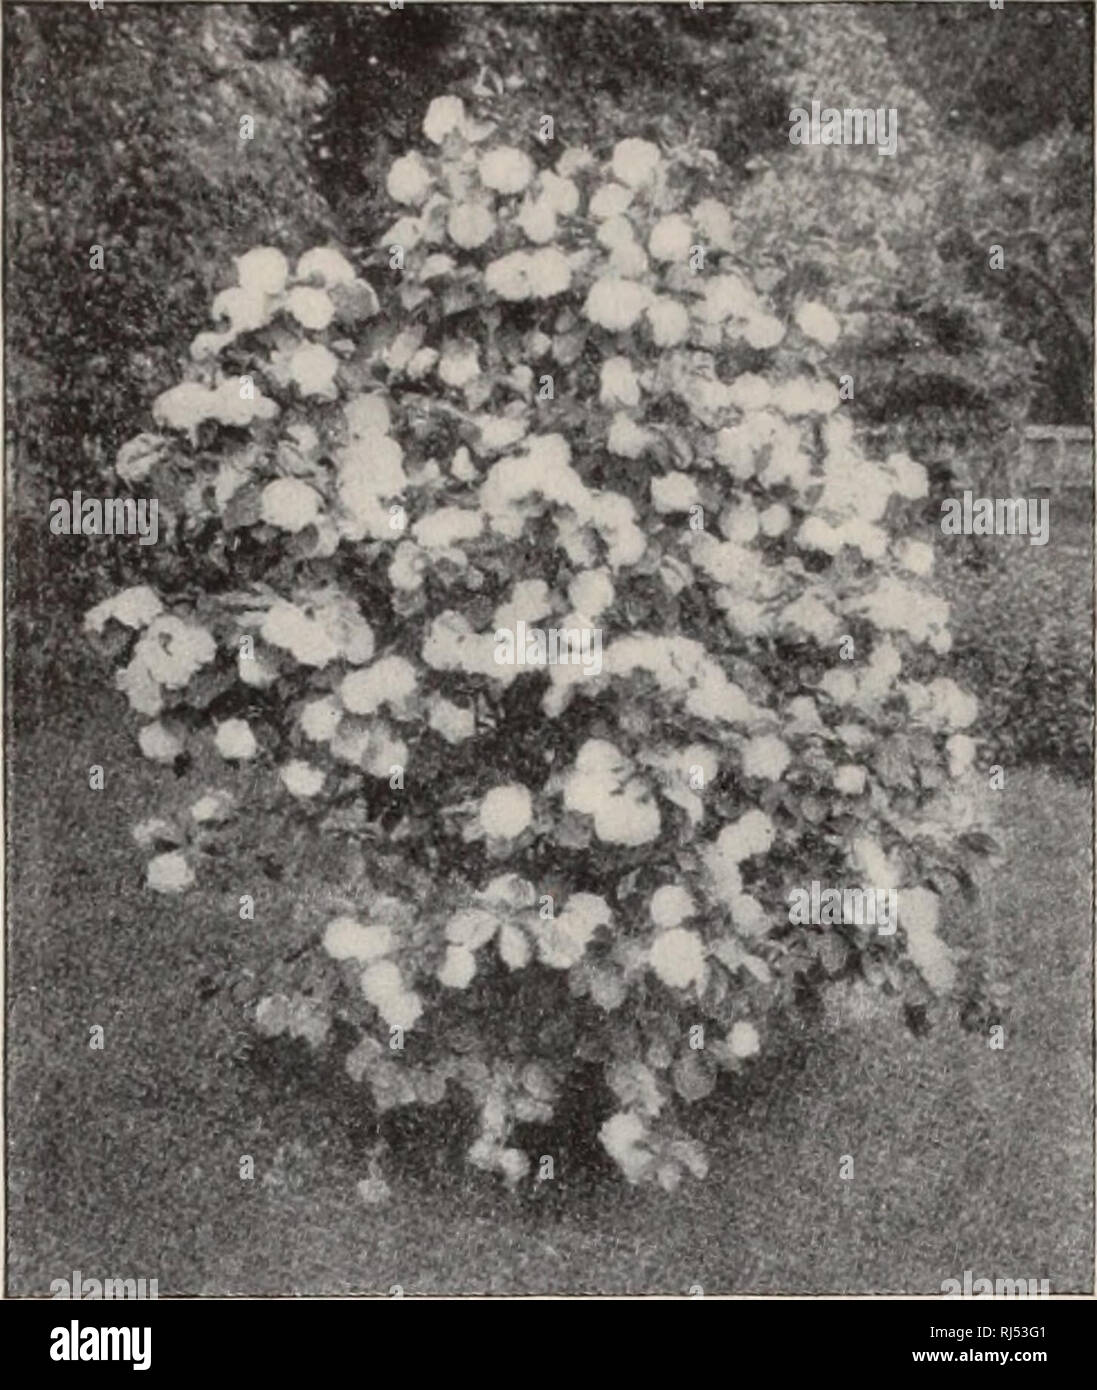 . Choice hardy trees and plants / F.W. Kelsey Nursery Company.. Nursery Catalogue. 46 FREDERICK W. KELvSEY.. 1BURNUM PLICATUM. VACCINIUM vacillans (II). A smaller shrub than V. corymbosum ; produces the well-known blue- berry fruit of commerce. 25 and 35 cts. Low prices in quantity. VIBURNUM acerifolium. Maple-Leaved Vi- KURNi -M (II). Flat clusters of white flowers in early spring; dark berries in autumn. 35 cts. VIBURNUM cassinoides (II). Rich green leaves and white flowers in June; handsome dark red berries in fall. 25 cts. VIBURNUM Cotinifolum. A fine variety; white flowers in early sprin Stock Photo